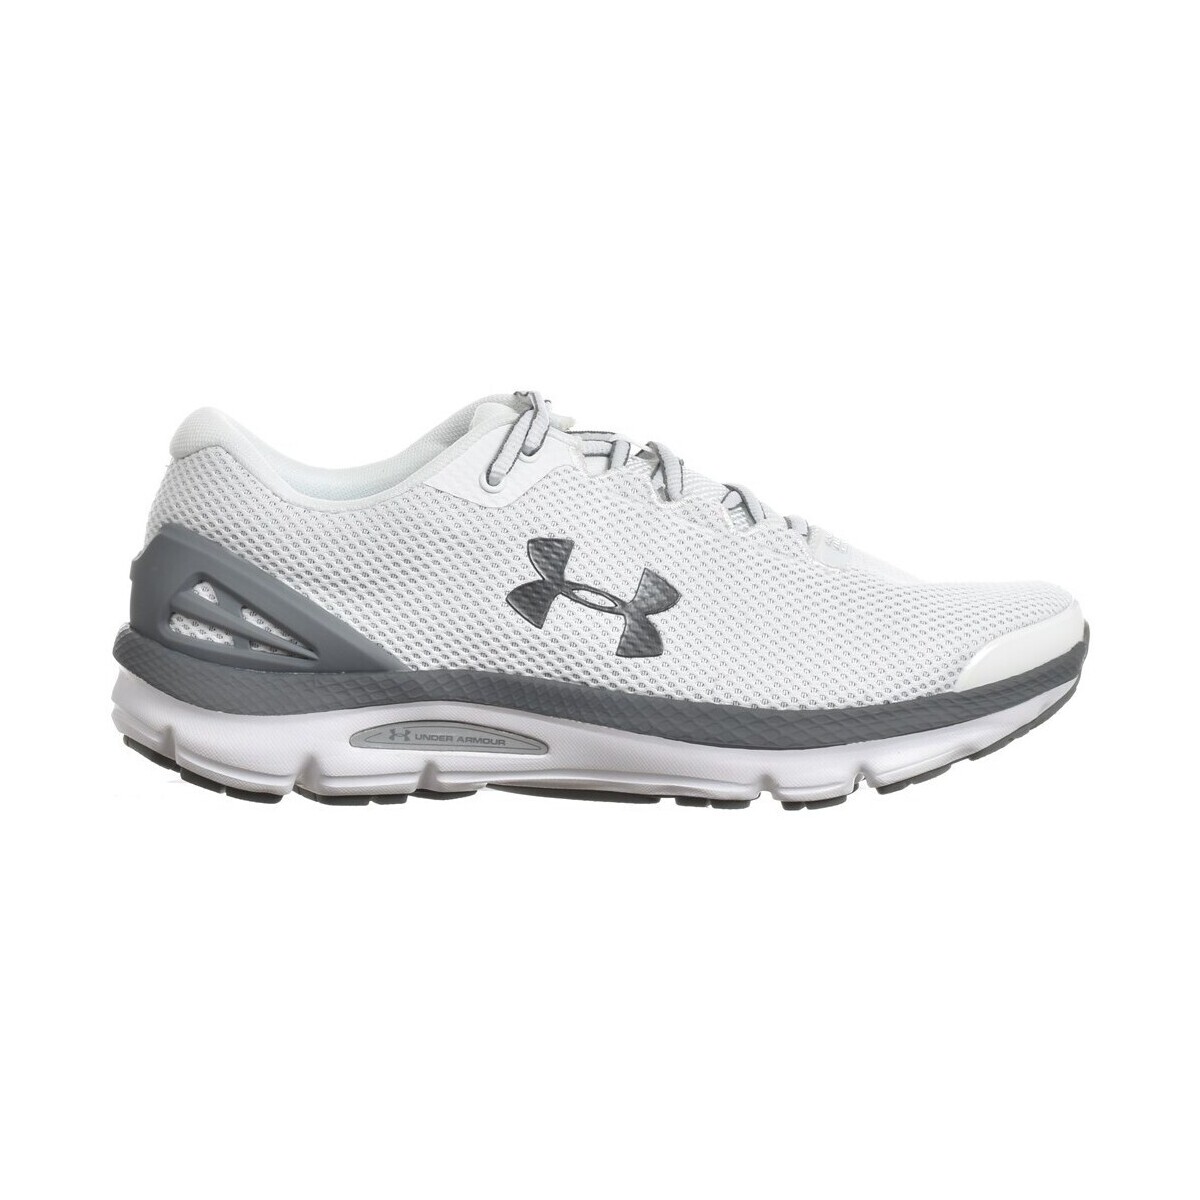 Under Armour Charged Gemini 2020 White